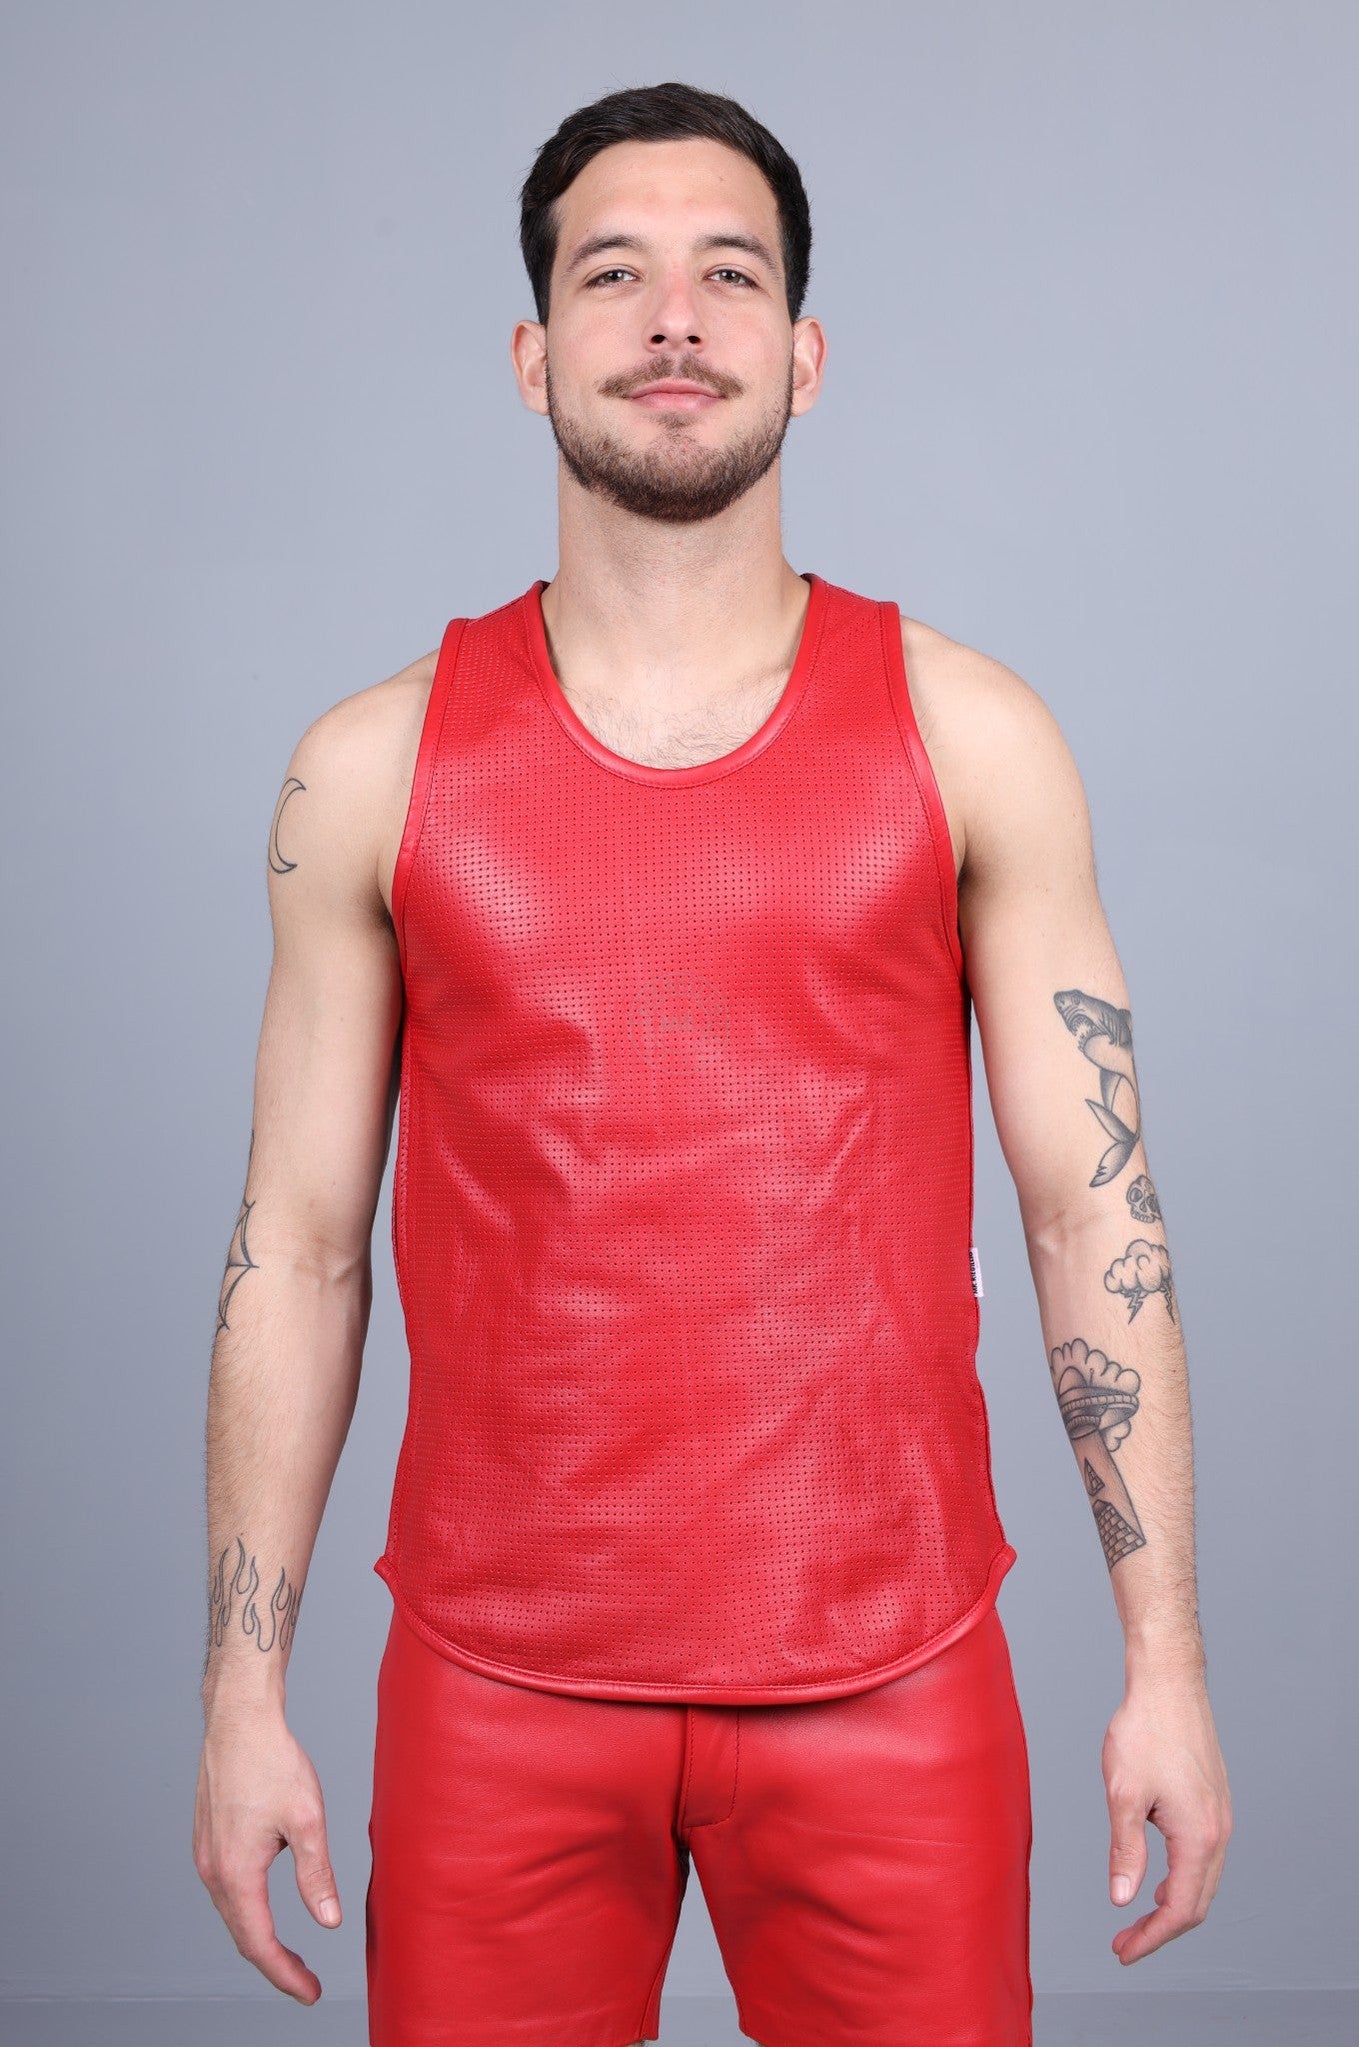 Red Leather Perforated Tank Top at MR. Riegillio